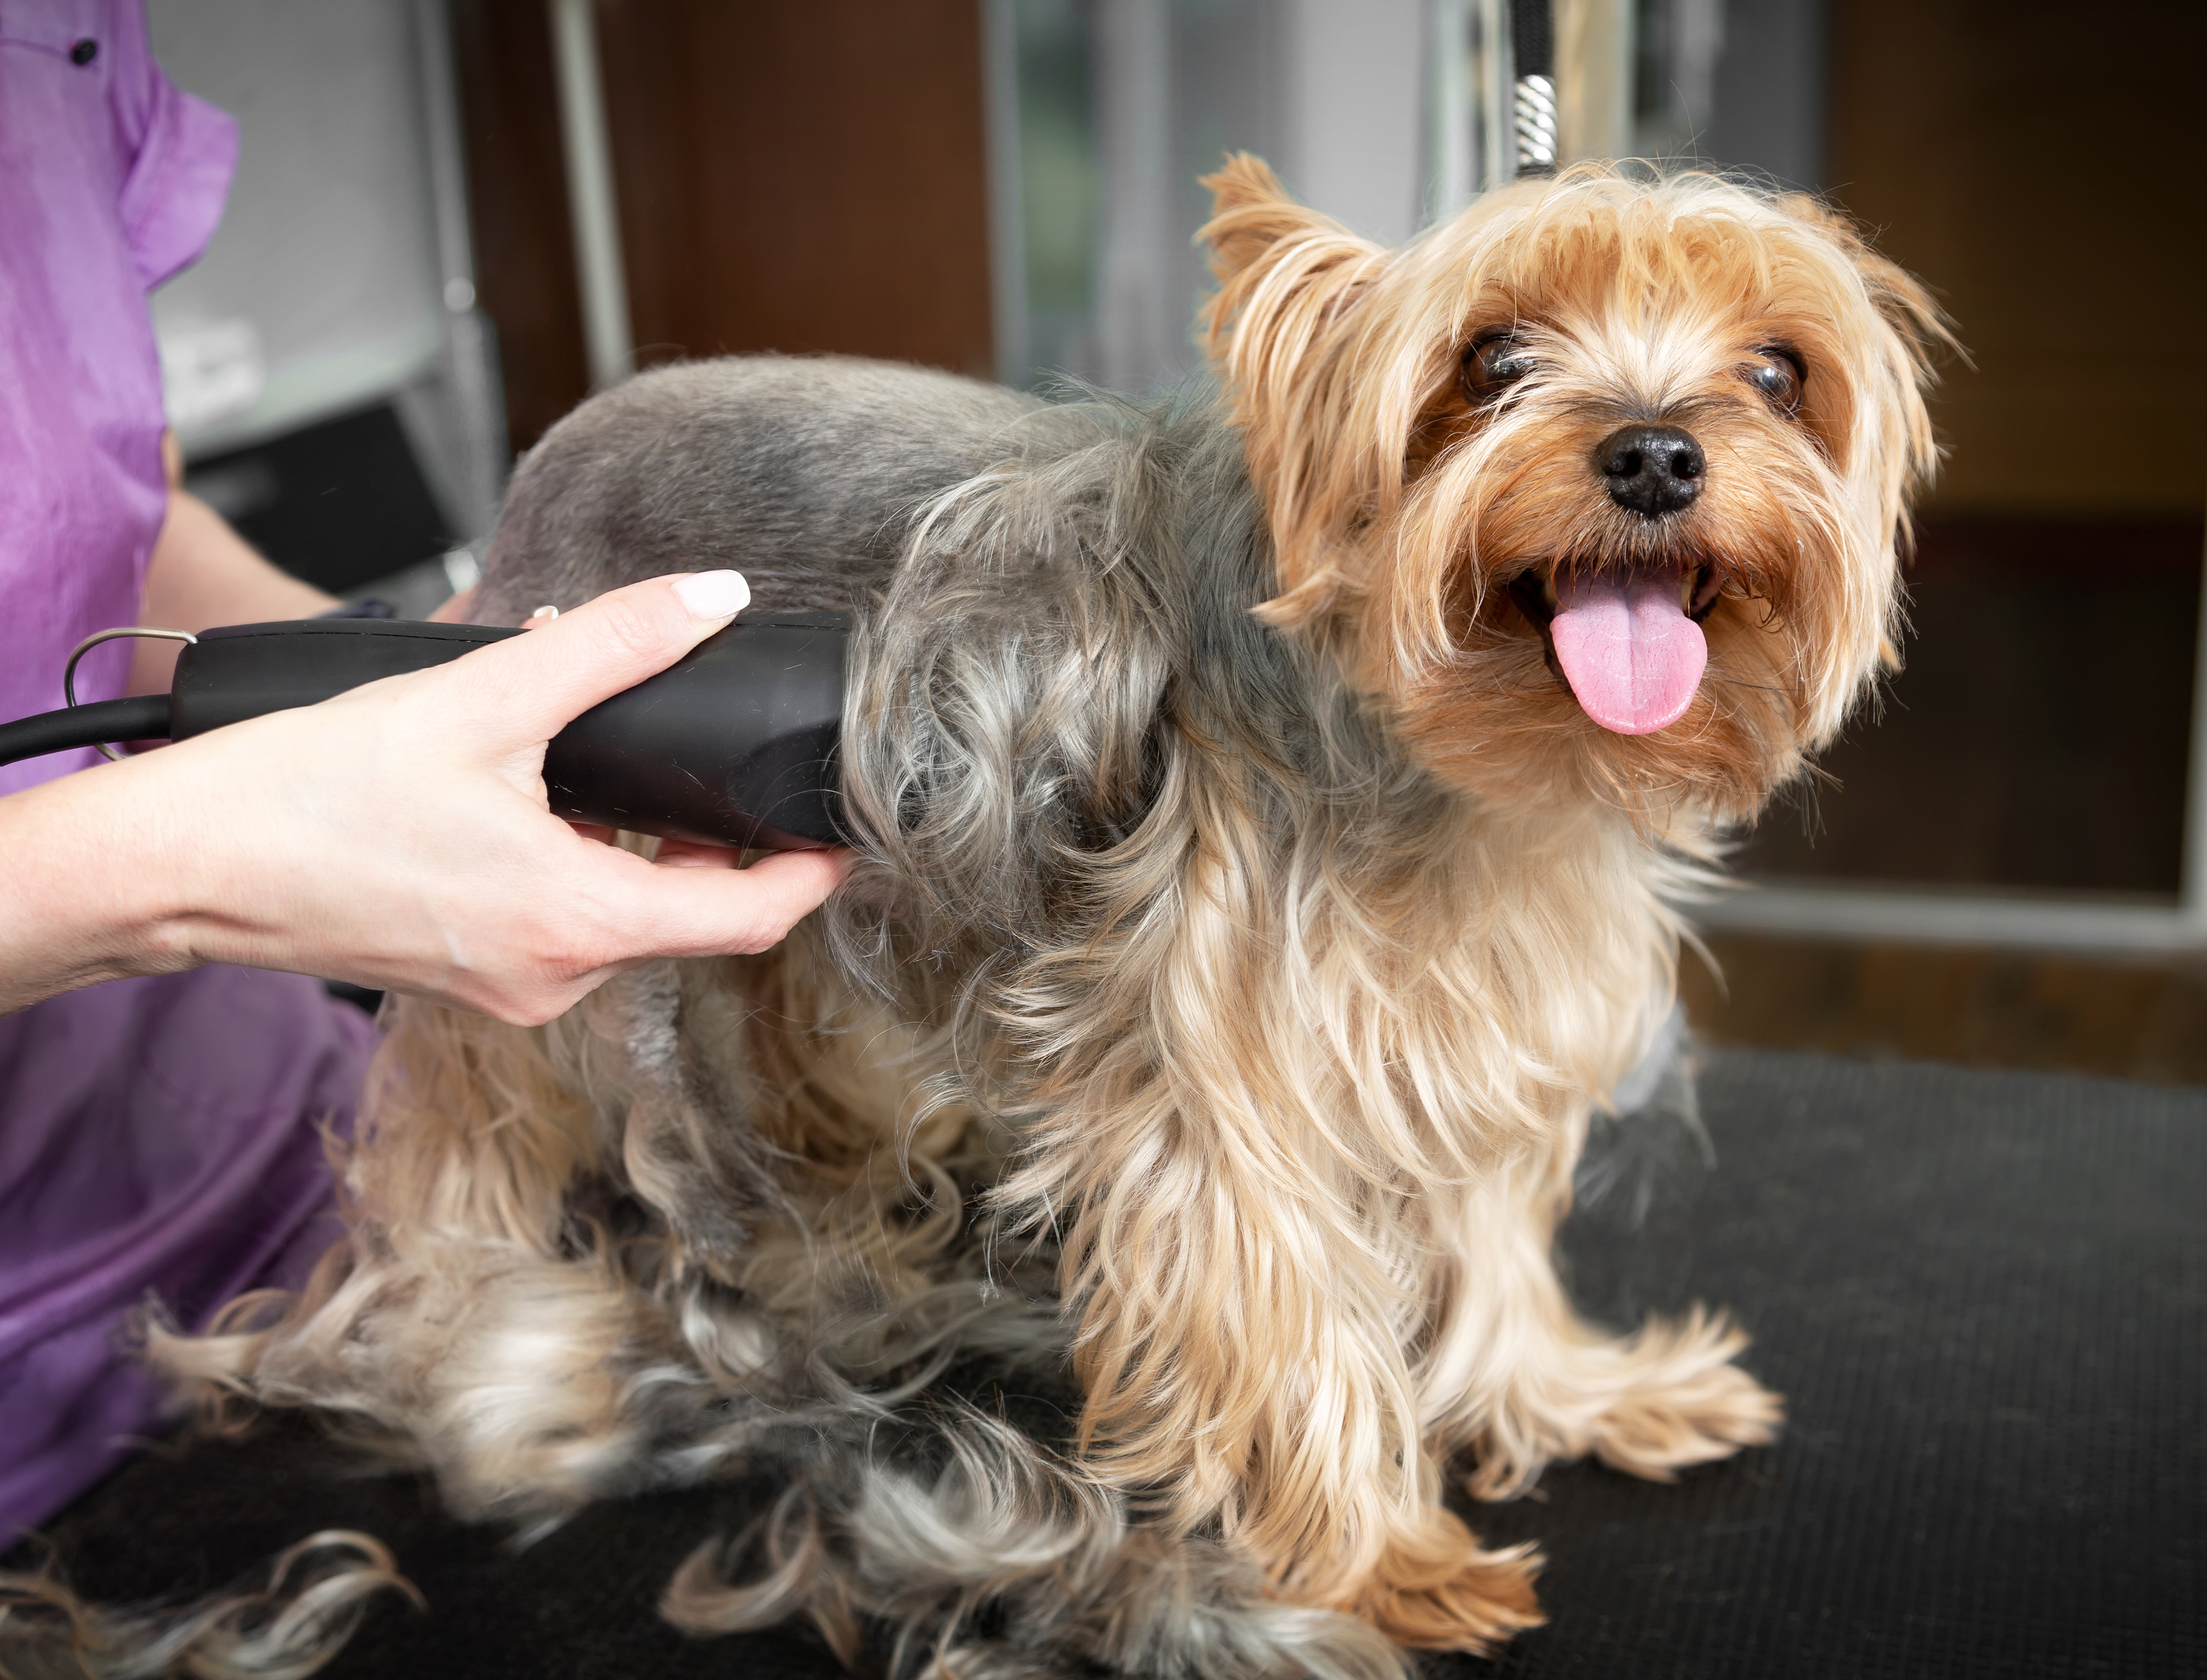 A happy Yorkie on a grooming table while the groomer trims their single coat with clippers